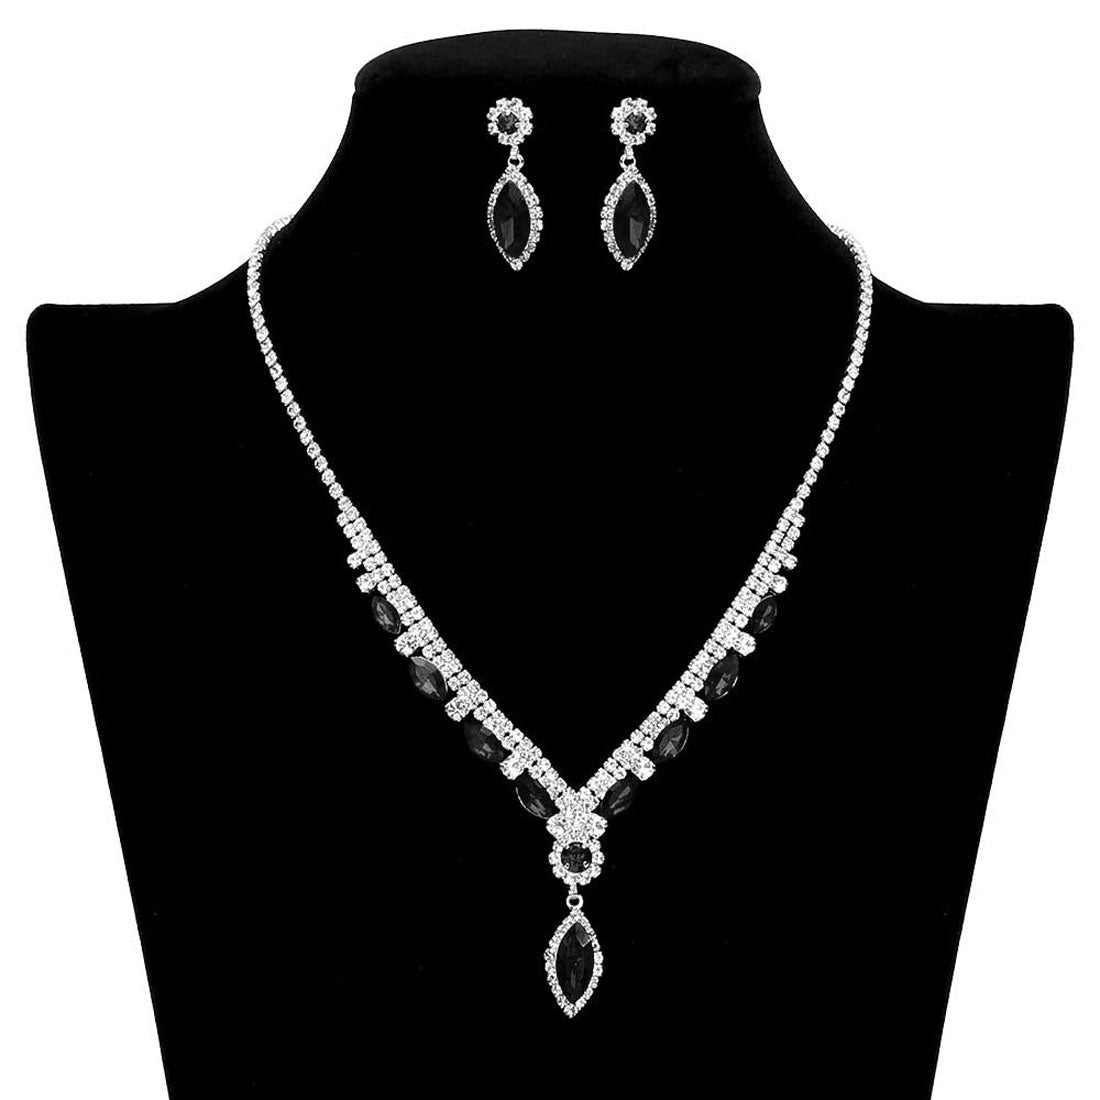 Black Marquise Stone Accented Rhinestone Necklace. Get ready with these Rhinestone Necklace, put on a pop of color to complete your ensemble. Perfect for adding just the right amount of shimmer & shine and a touch of class to special events. Perfect Birthday Gift, Anniversary Gift, Mother's Day Gift, Graduation Gift, Valentine’s Day gift or any special occasion.